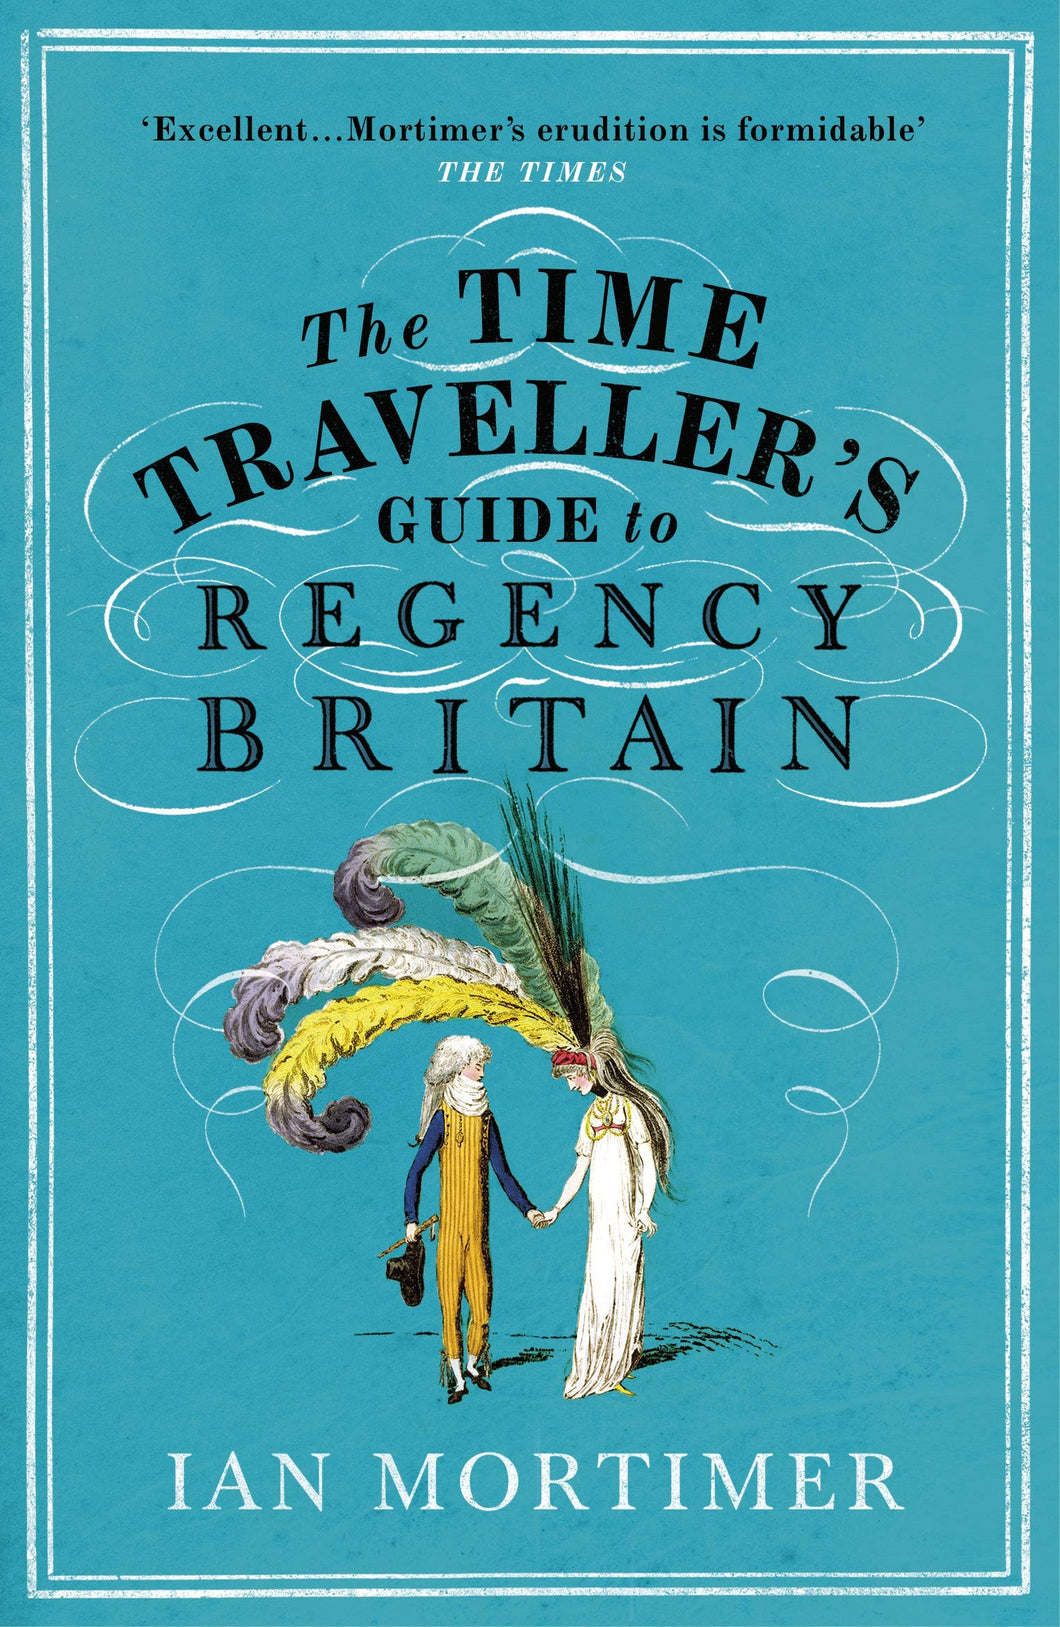 The Time Travellers Guide to Regency England by Ian Mortimer